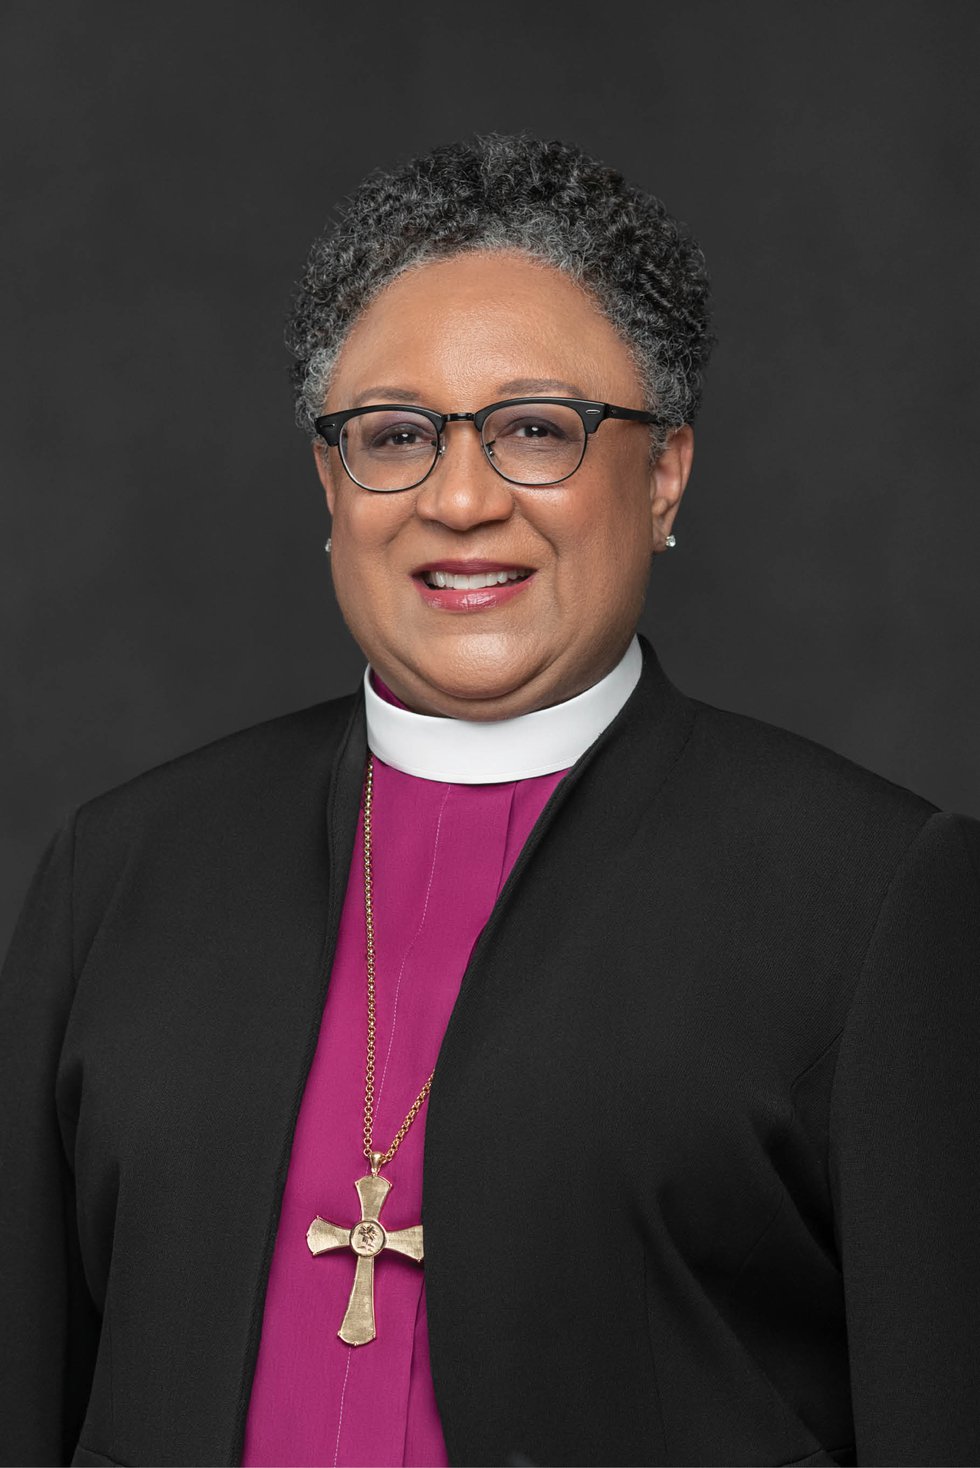 Phoebe_Roaf_May_2019_credit_Episcopal_Diocese_of_West_Tennessee.jpg